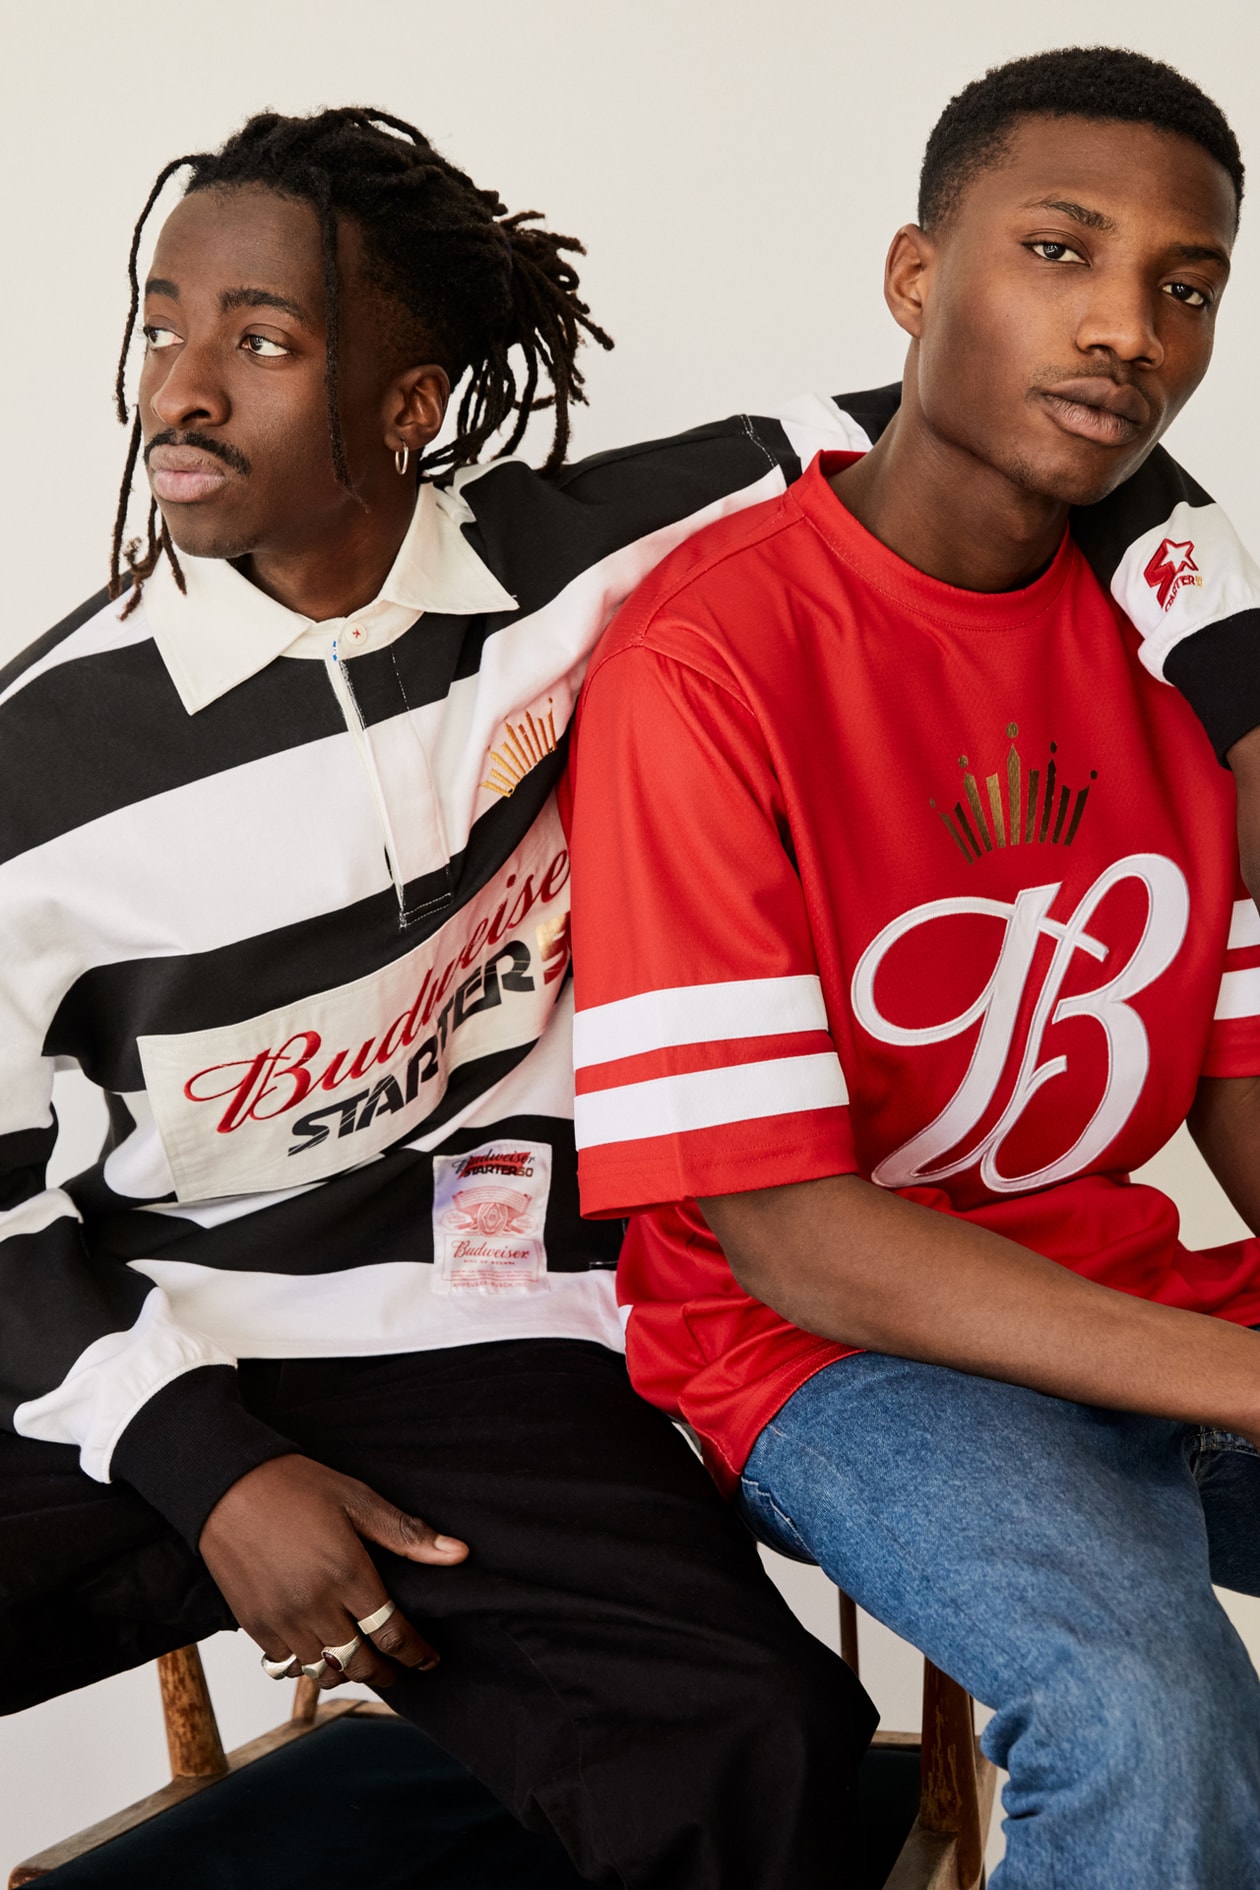 Starter Black label collaborations music sports 90s hip-hop nostalgia NCAA Budweiser capsule collection RHUDE BAPE Acne Studios college basketball teams t-shirts, hoodies, jackets and hats jeff staple athletes artists brands ONLY NY DTLR NBA Hardwood 